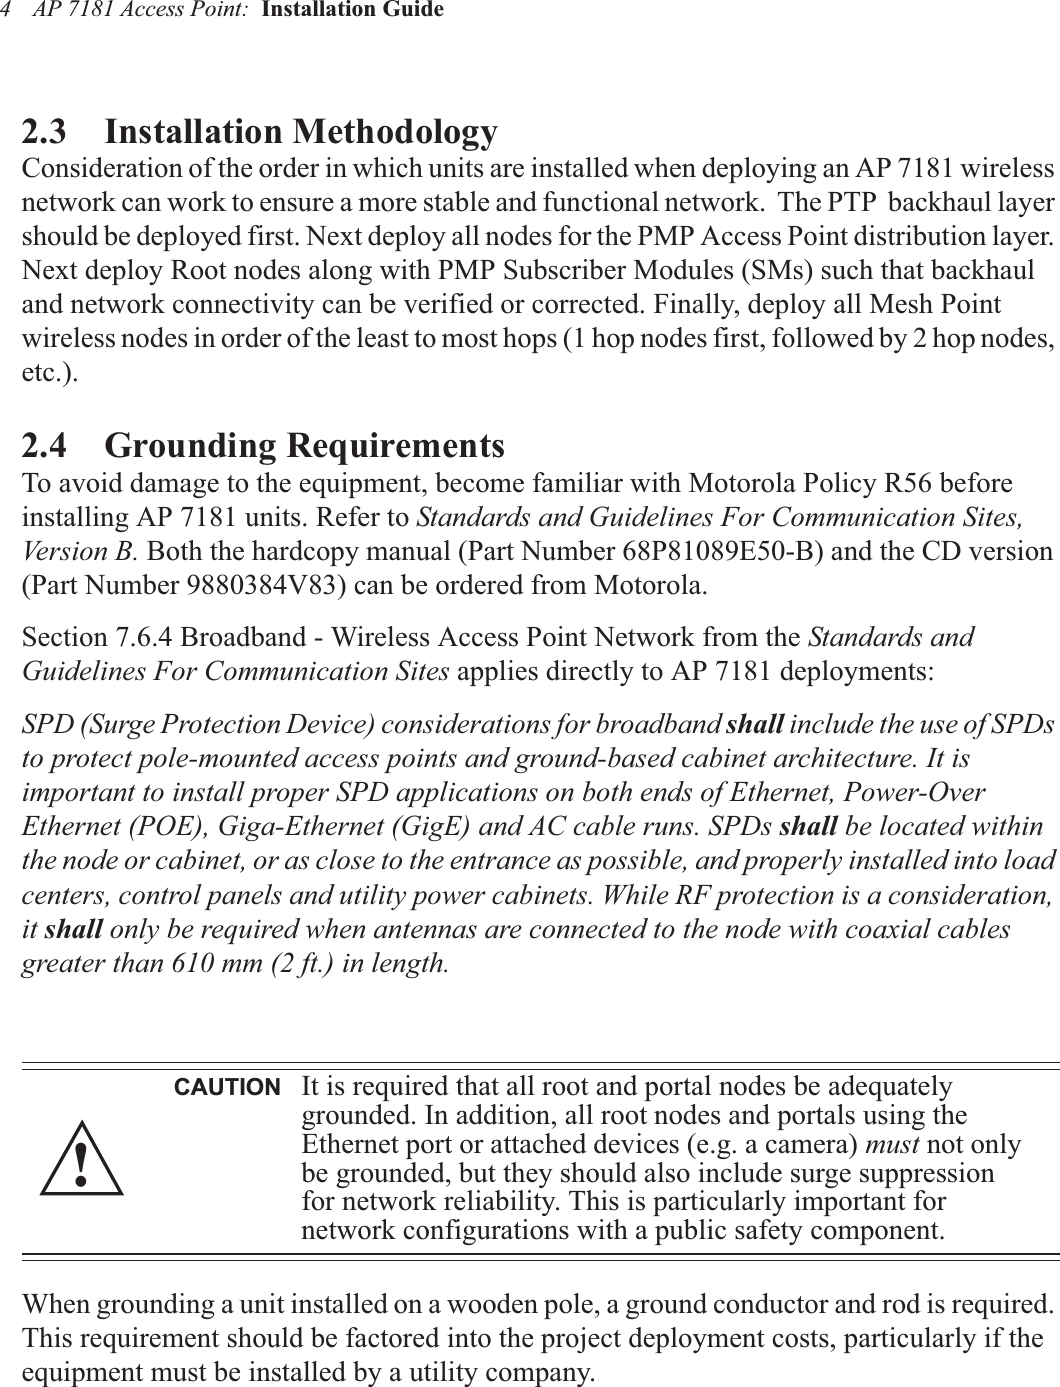 AP 7181 Access Point:  Installation Guide 42.3    Installation MethodologyConsideration of the order in which units are installed when deploying an AP 7181 wireless network can work to ensure a more stable and functional network.  The PTP  backhaul layer should be deployed first. Next deploy all nodes for the PMP Access Point distribution layer. Next deploy Root nodes along with PMP Subscriber Modules (SMs) such that backhaul and network connectivity can be verified or corrected. Finally, deploy all Mesh Point wireless nodes in order of the least to most hops (1 hop nodes first, followed by 2 hop nodes, etc.).2.4    Grounding RequirementsTo avoid damage to the equipment, become familiar with Motorola Policy R56 before installing AP 7181 units. Refer to Standards and Guidelines For Communication Sites, Version B. Both the hardcopy manual (Part Number 68P81089E50-B) and the CD version (Part Number 9880384V83) can be ordered from Motorola.Section 7.6.4 Broadband - Wireless Access Point Network from the Standards and Guidelines For Communication Sites applies directly to AP 7181 deployments:SPD (Surge Protection Device) considerations for broadband shall include the use of SPDs to protect pole-mounted access points and ground-based cabinet architecture. It is important to install proper SPD applications on both ends of Ethernet, Power-Over Ethernet (POE), Giga-Ethernet (GigE) and AC cable runs. SPDs shall be located within the node or cabinet, or as close to the entrance as possible, and properly installed into load centers, control panels and utility power cabinets. While RF protection is a consideration, it shall only be required when antennas are connected to the node with coaxial cables greater than 610 mm (2 ft.) in length.When grounding a unit installed on a wooden pole, a ground conductor and rod is required. This requirement should be factored into the project deployment costs, particularly if the equipment must be installed by a utility company.CAUTION It is required that all root and portal nodes be adequately grounded. In addition, all root nodes and portals using the Ethernet port or attached devices (e.g. a camera) must not only be grounded, but they should also include surge suppression for network reliability. This is particularly important for network configurations with a public safety component.!